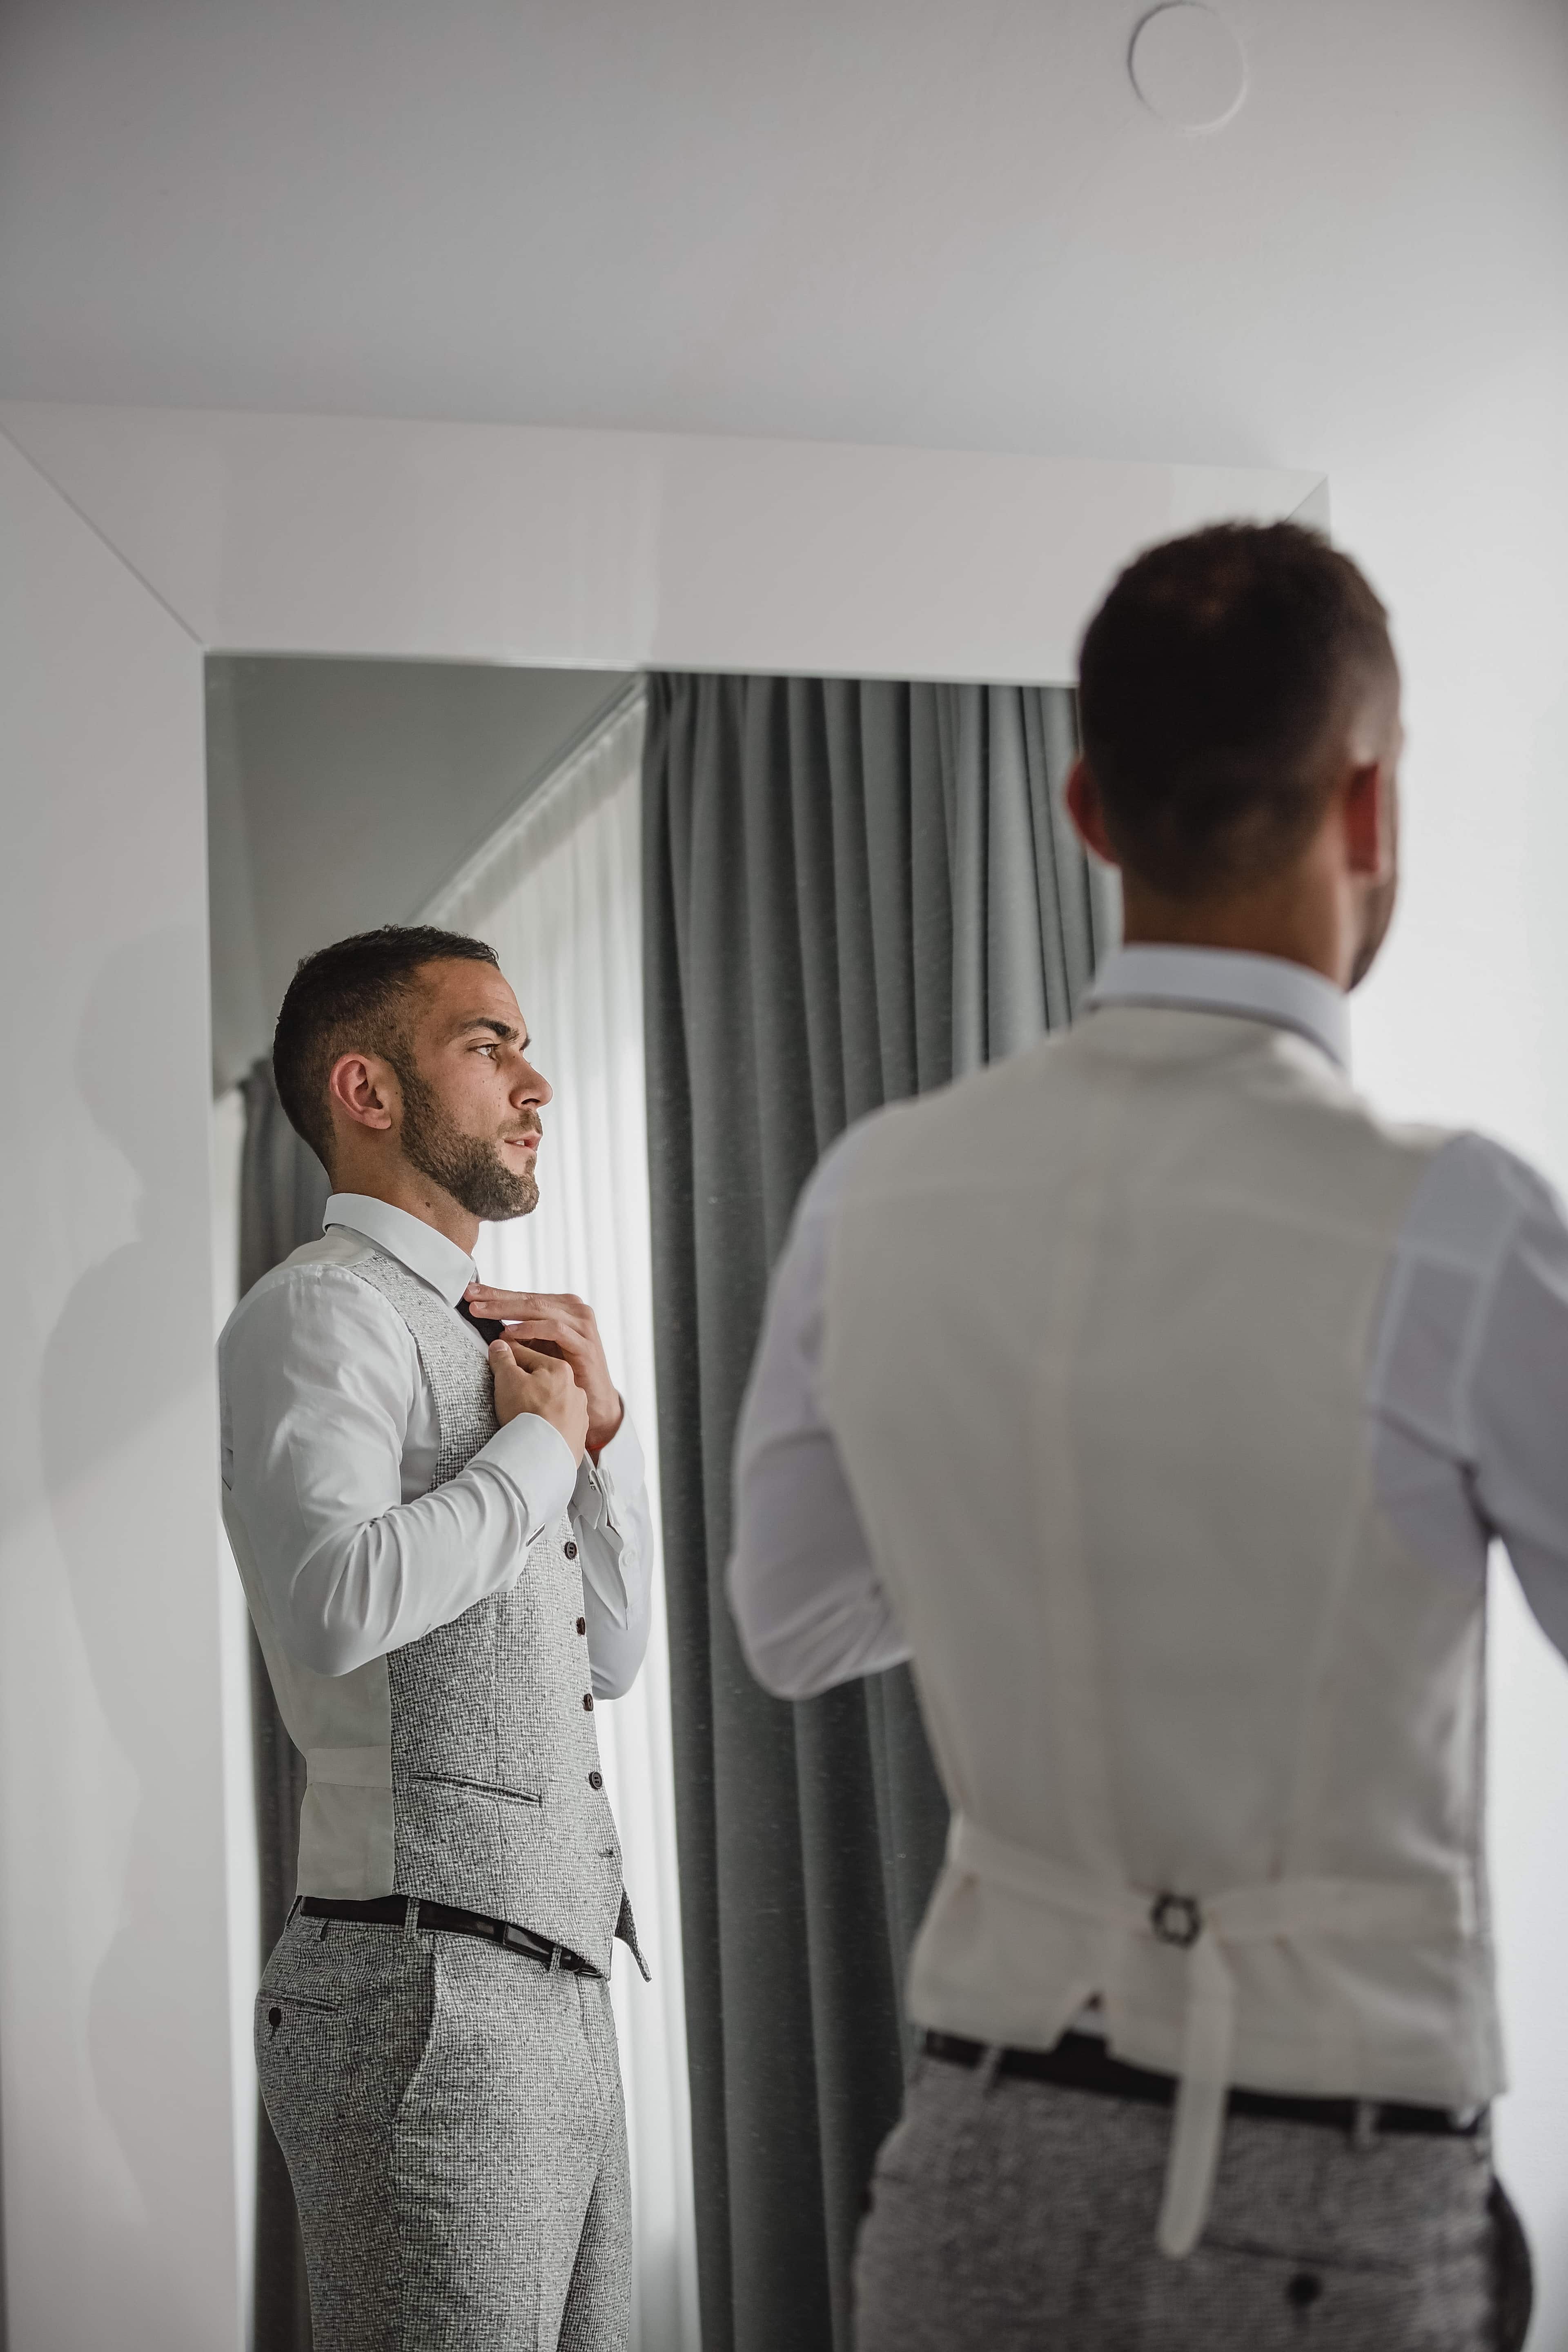 fax Lake Taupo Scheiden Free picture: handsome, photo model, reflection, outfit, tuxedo suit,  mirror, man, indoors, business, office